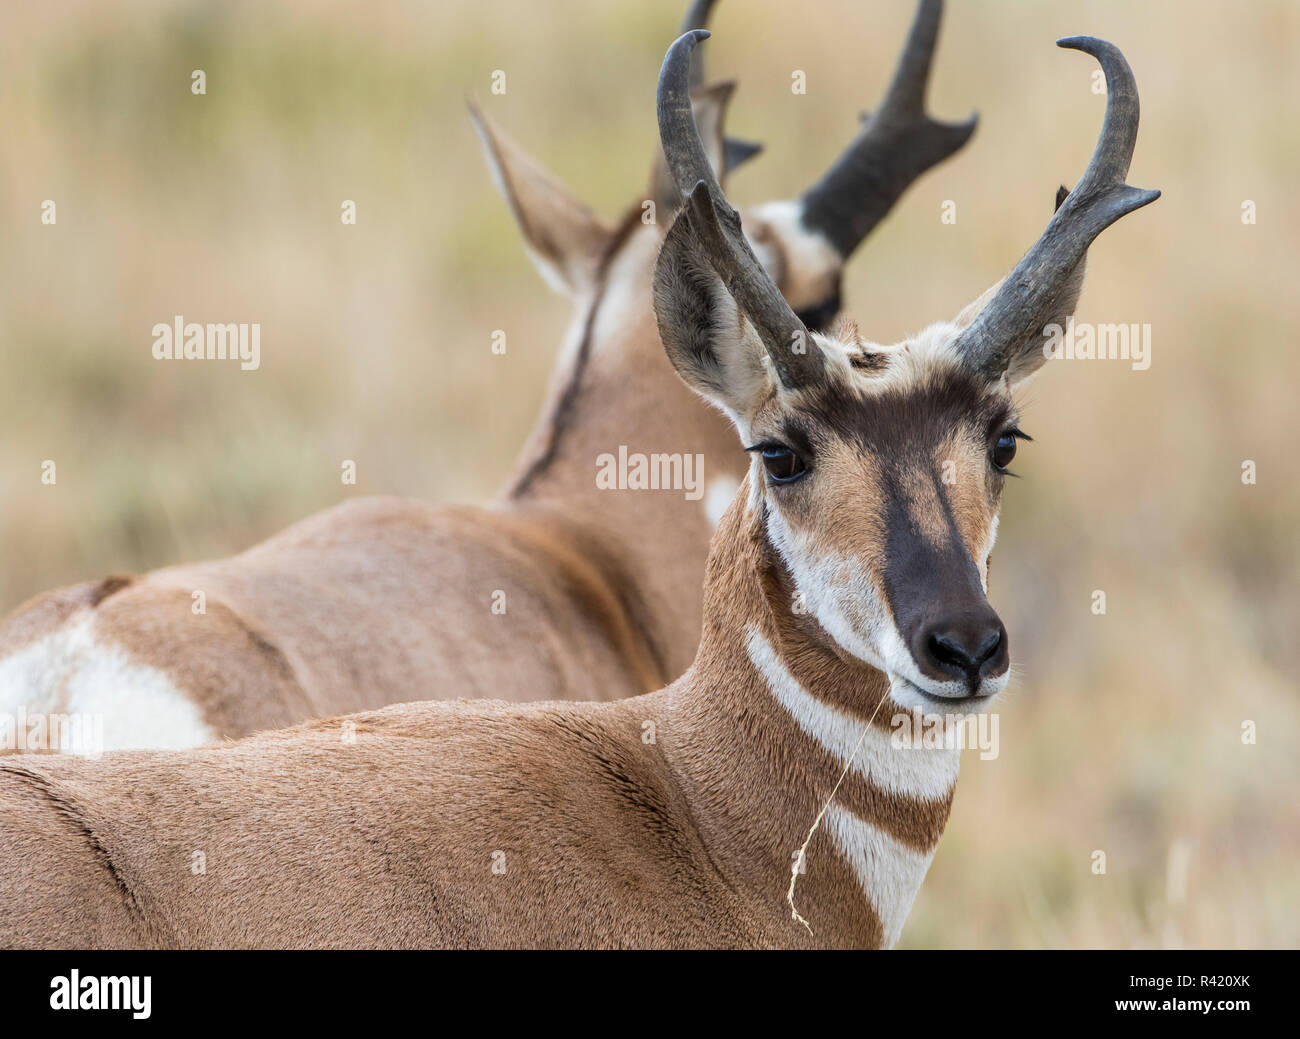 USA, Wyoming, Sublette County. Pronghorn buck, one of the fastest known land mammals. Stock Photo